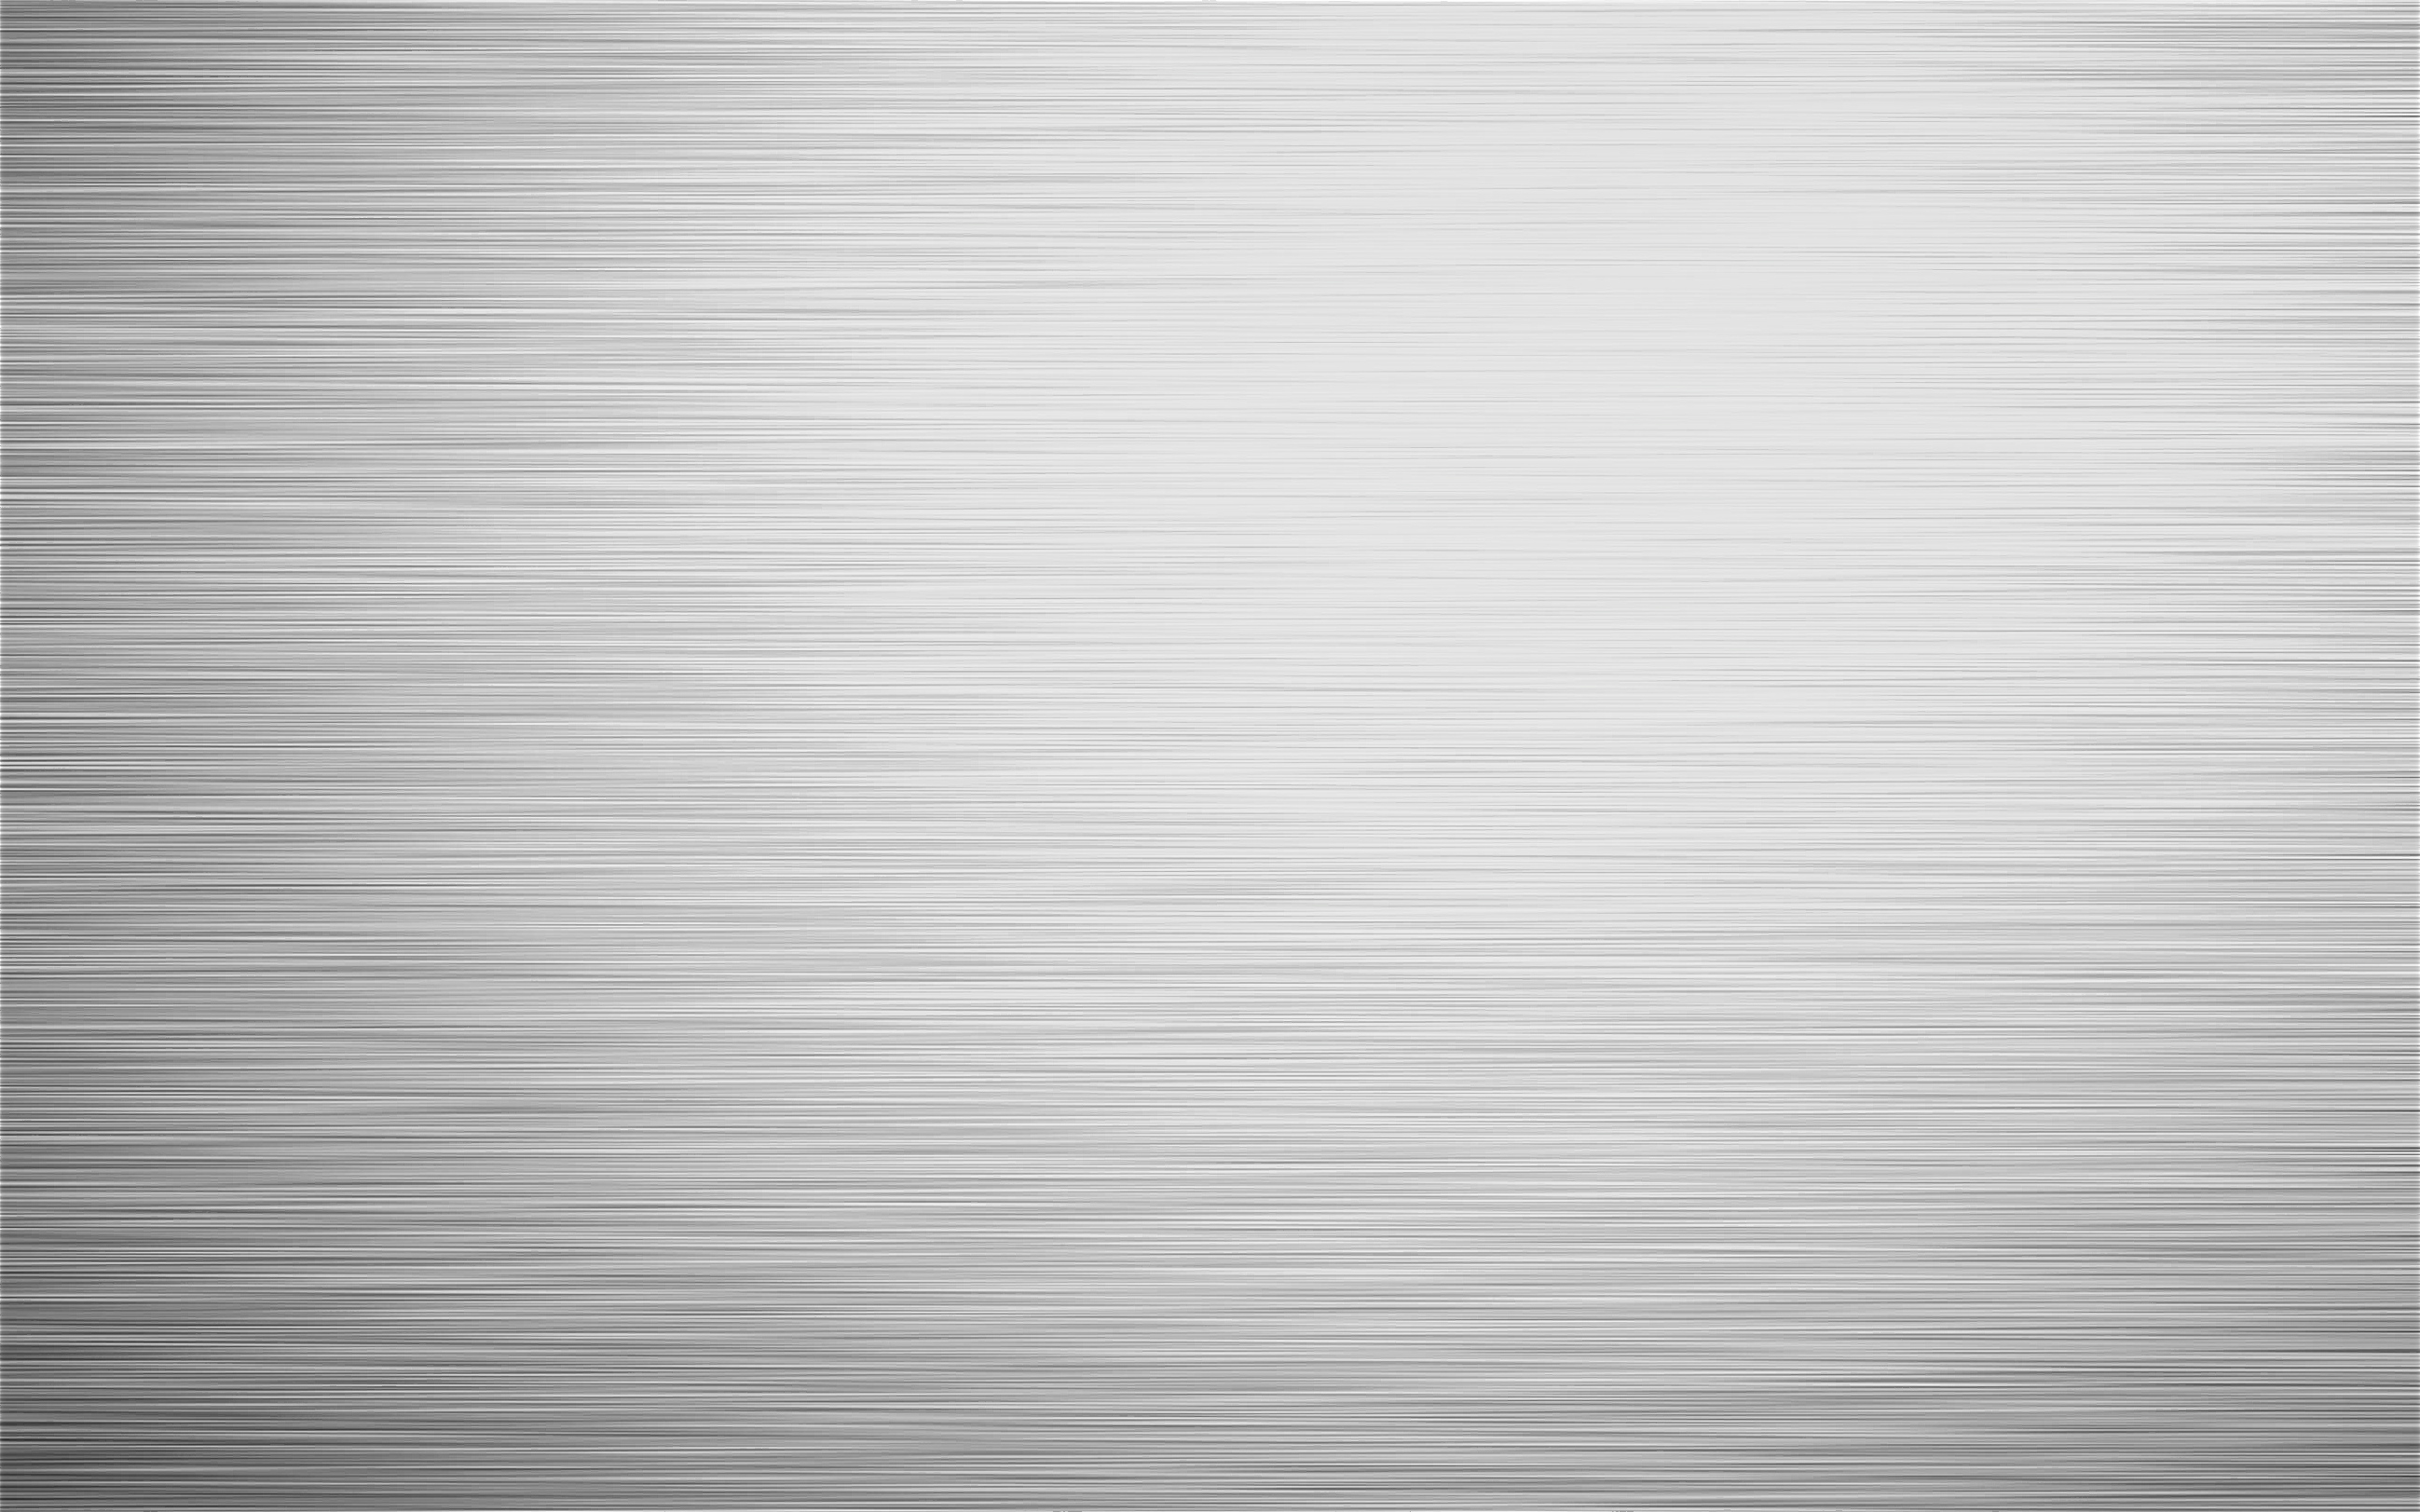 White Metallic Background Pictures Gallery